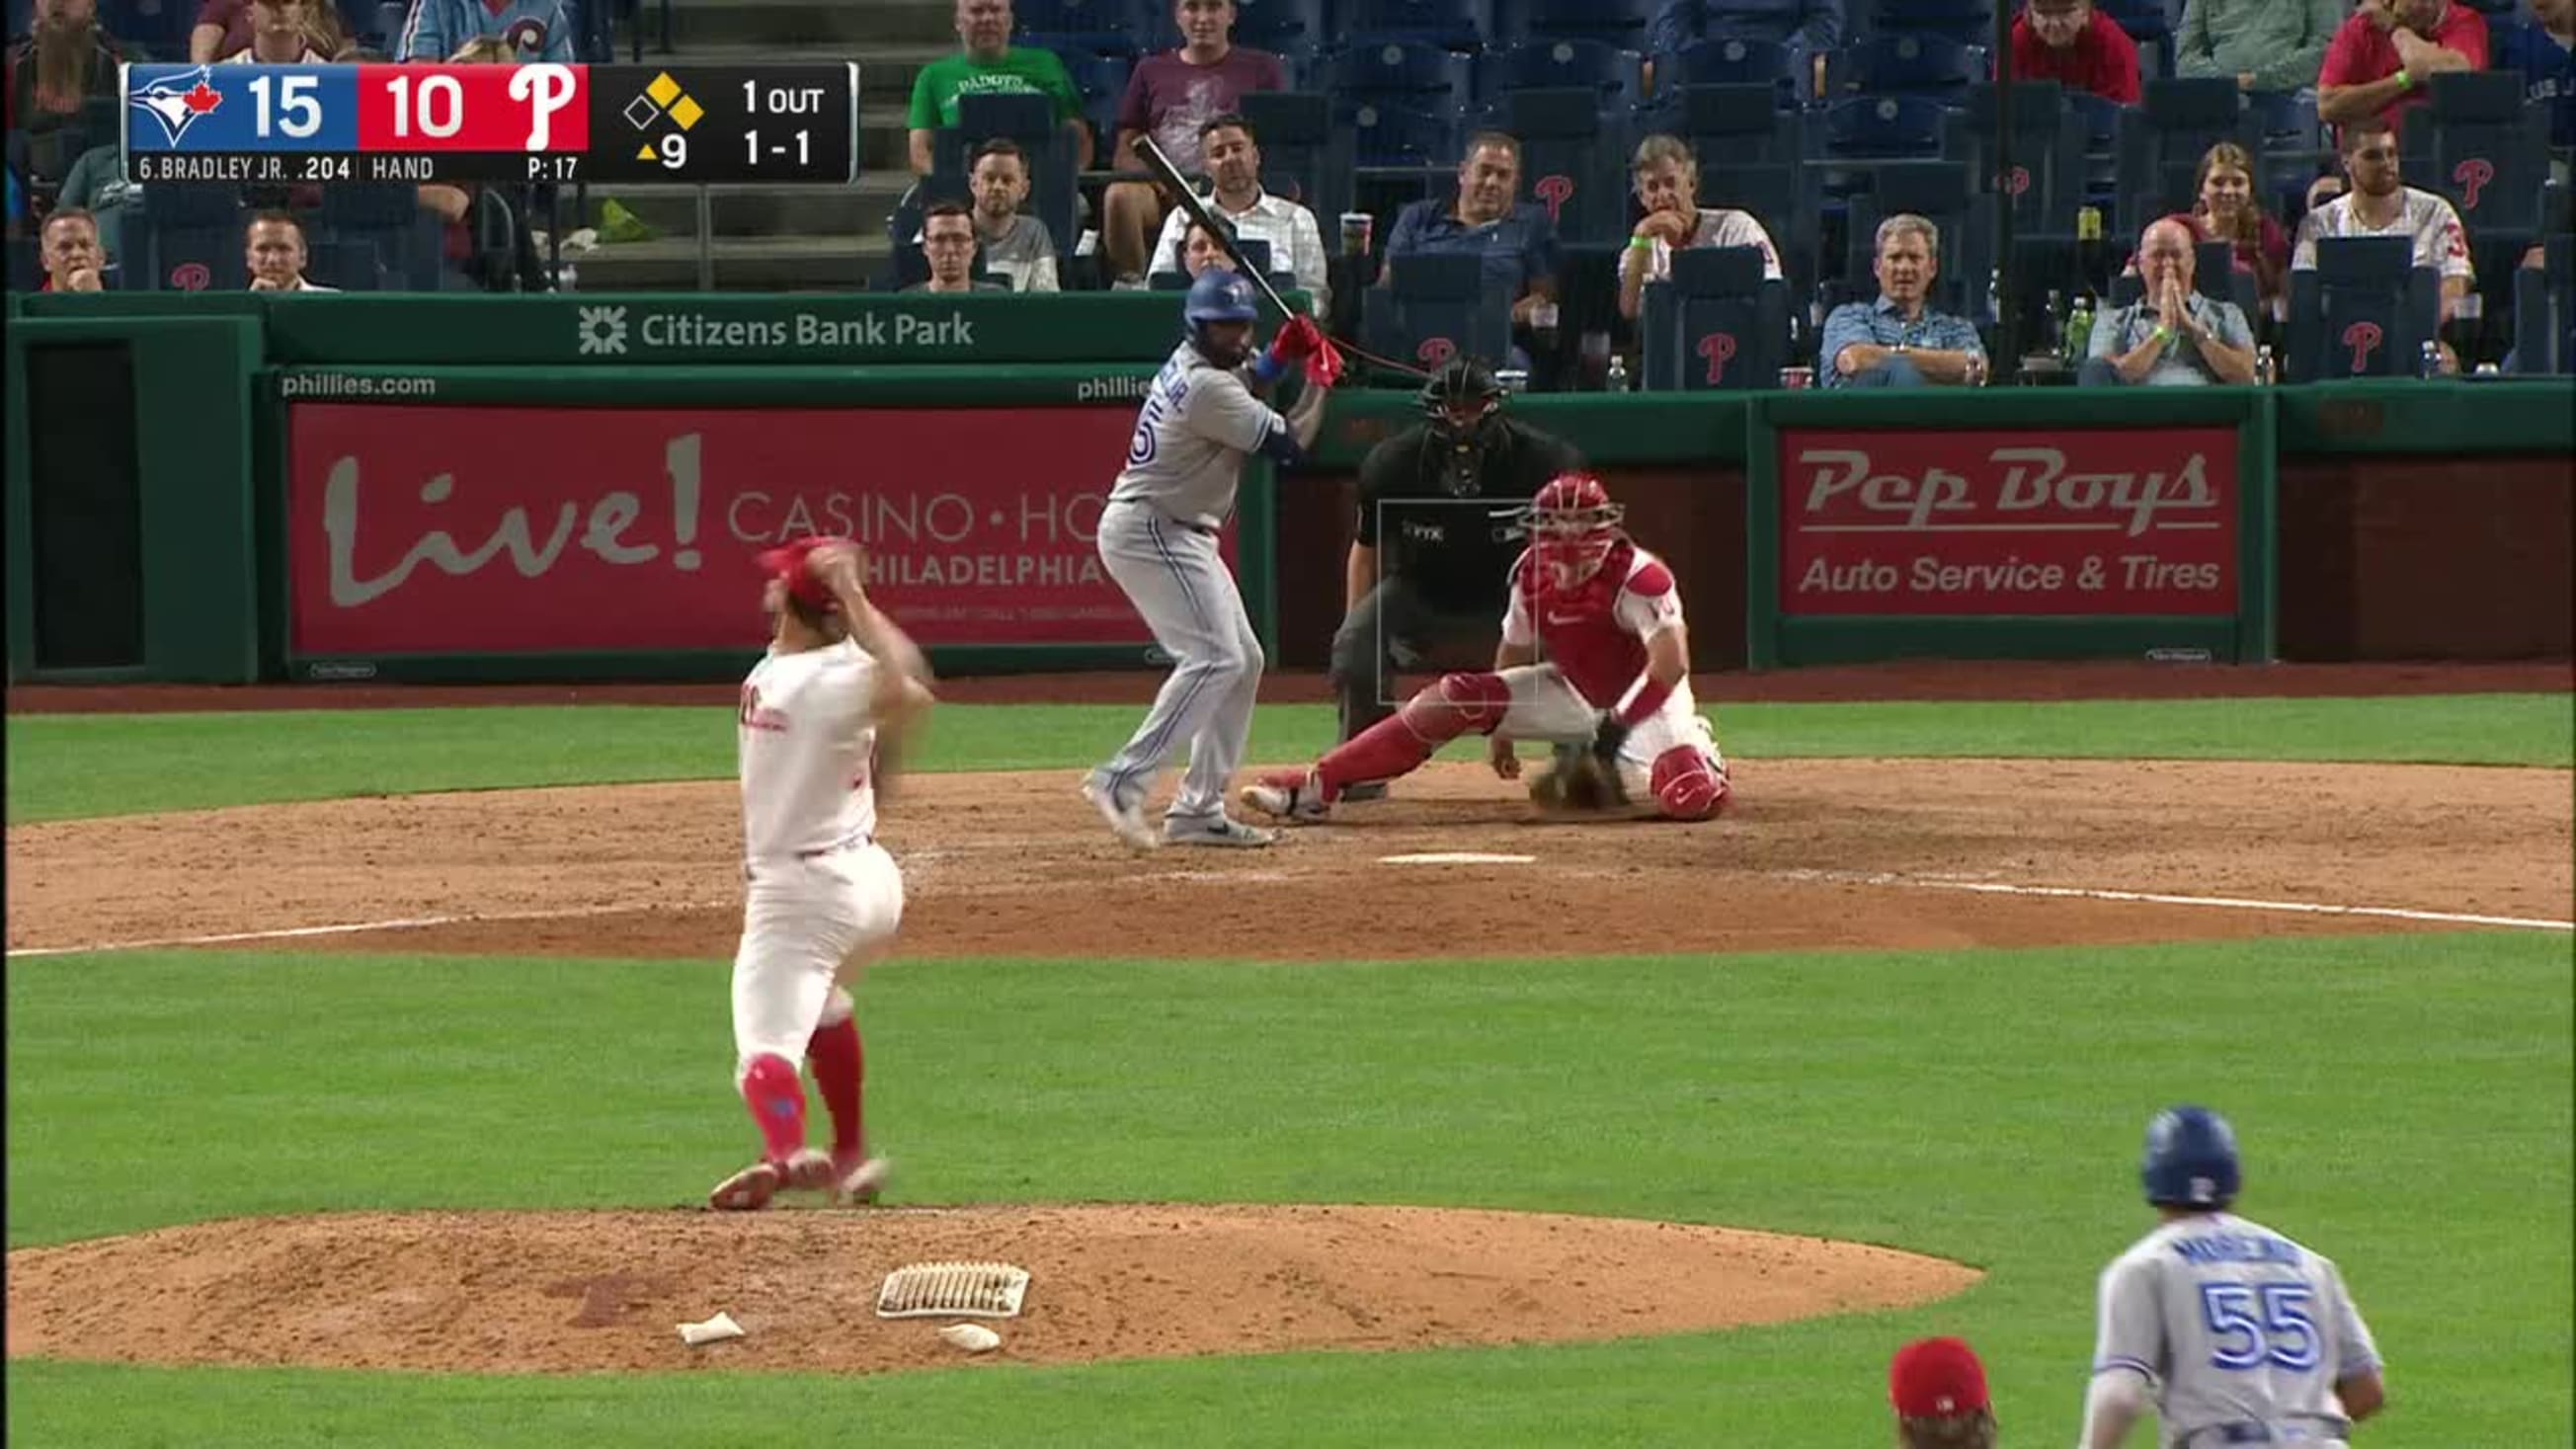 Jackie Bradley Jr. homered and then smirked at former college